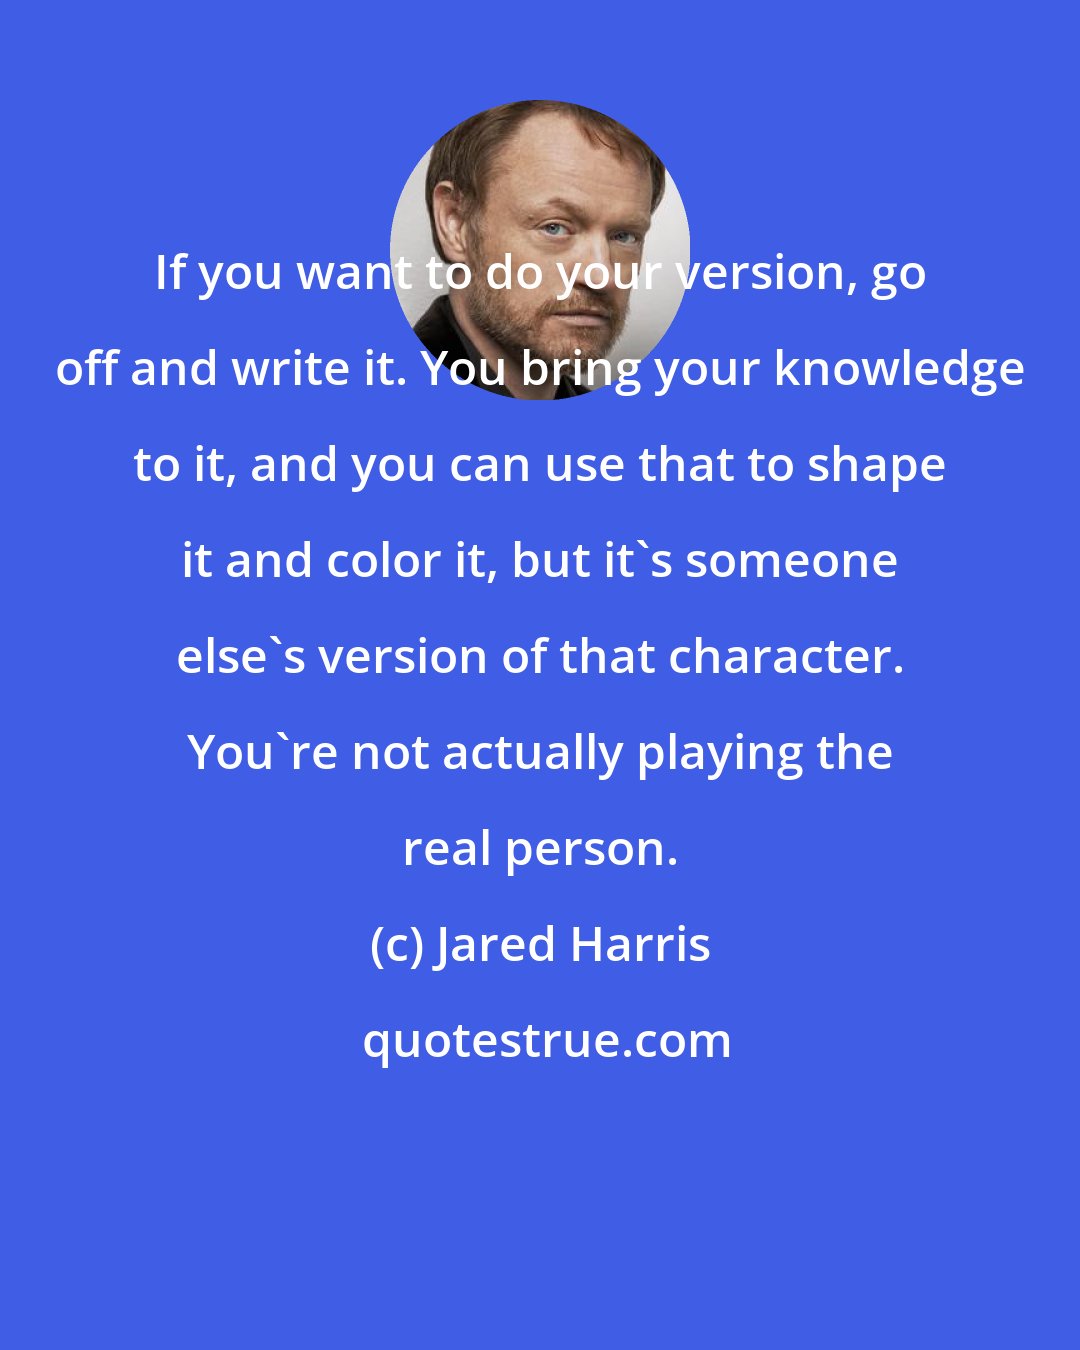 Jared Harris: If you want to do your version, go off and write it. You bring your knowledge to it, and you can use that to shape it and color it, but it's someone else's version of that character. You're not actually playing the real person.